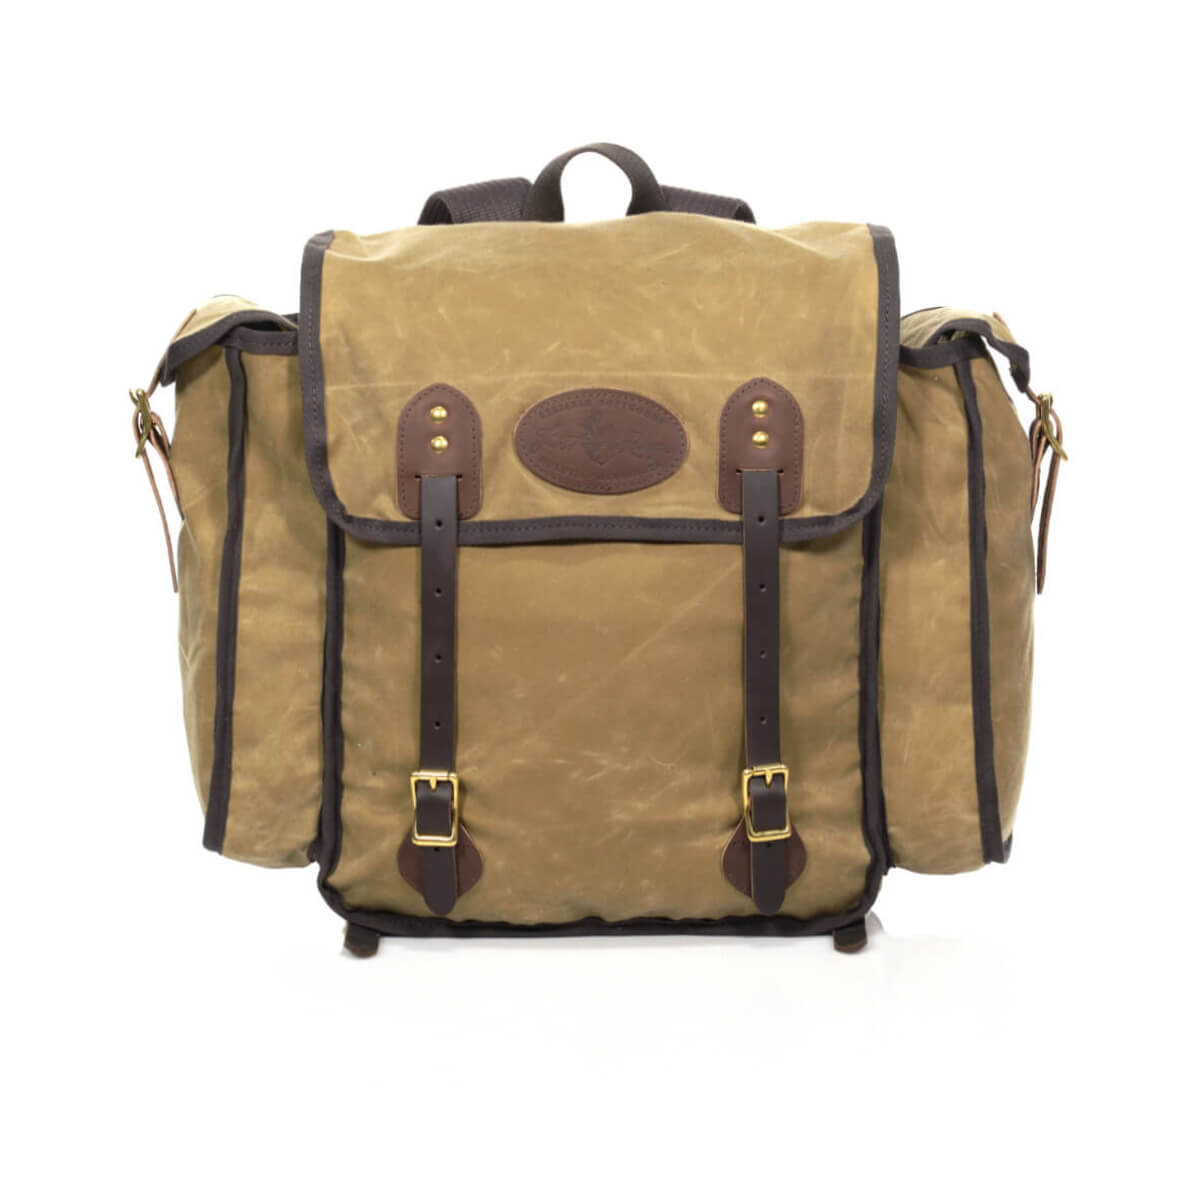 Frost River Cliff Jacobson Signature Pack, vintage style back pack